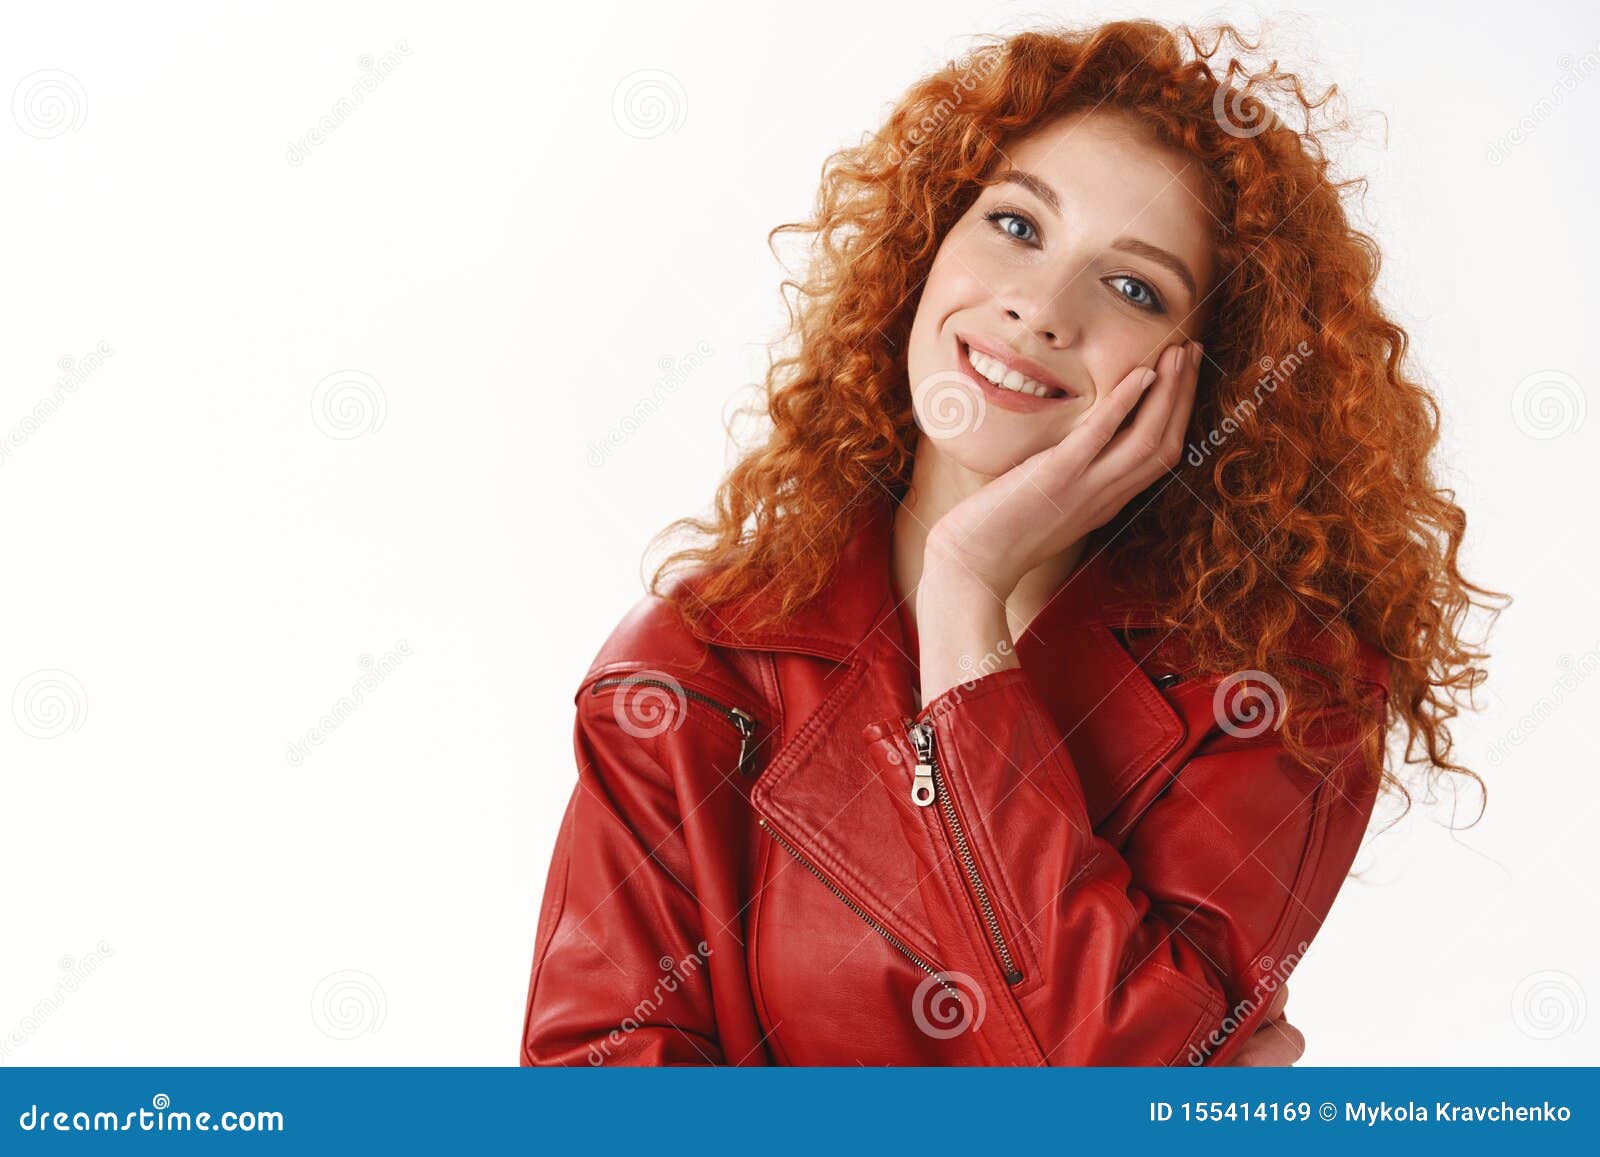 1. Redhead with Blue Eyes - wide 1